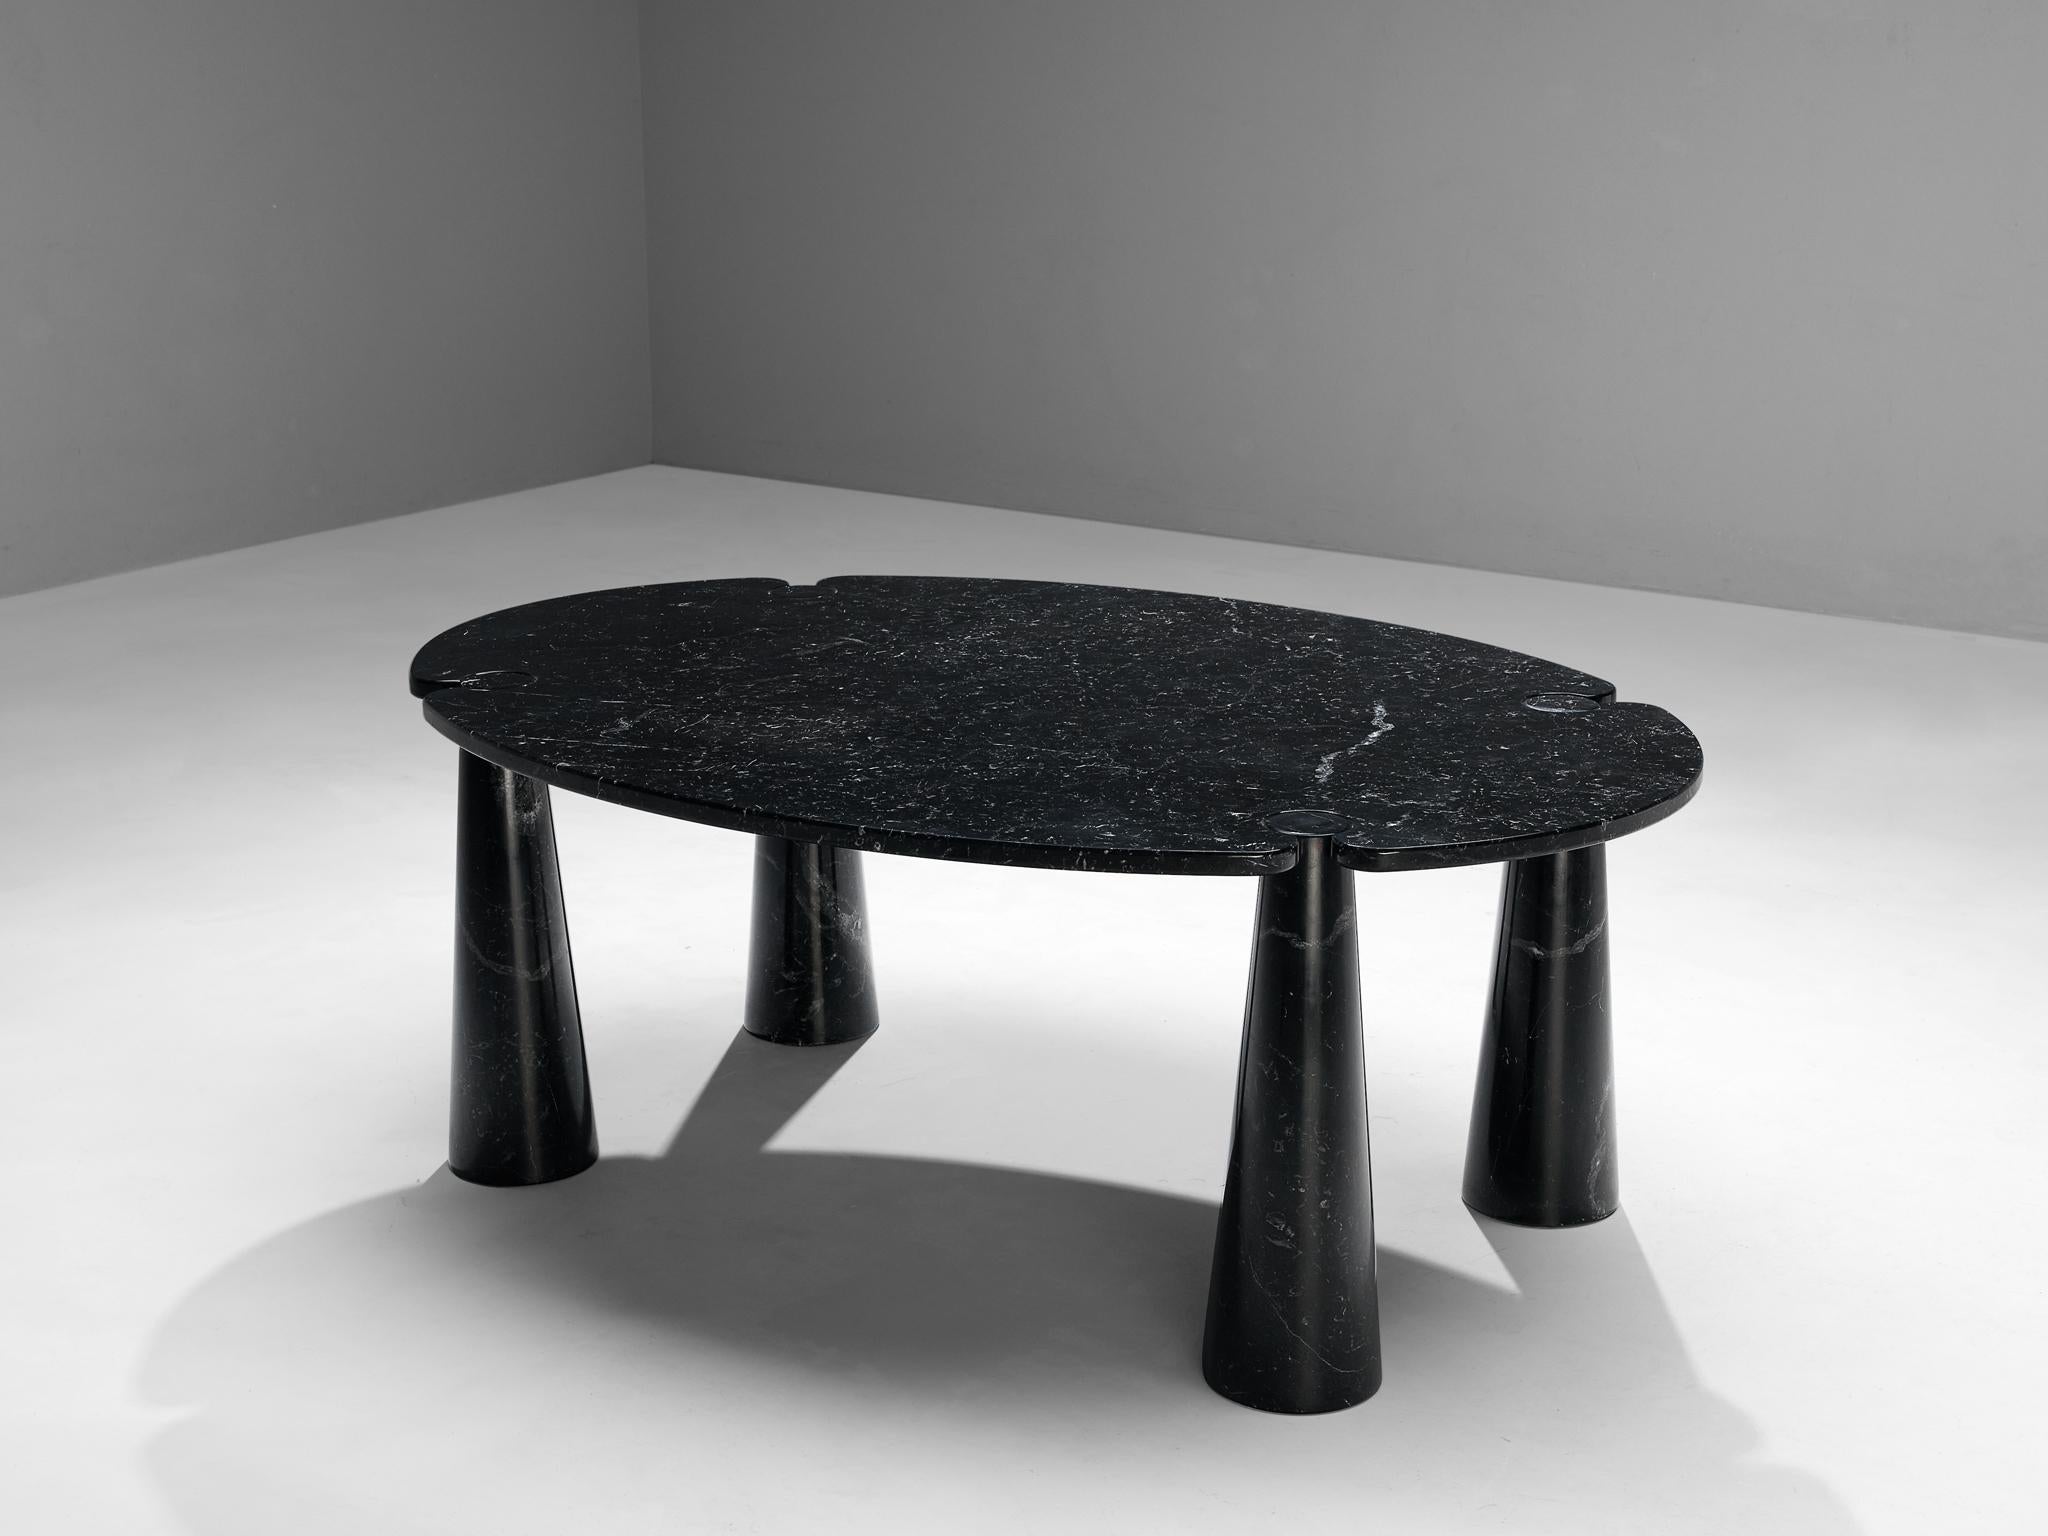 Angelo Mangiarotti for Skipper, dining table ‘Eros’, Marquina marble, 1971

This sculptural table by Angelo Mangiarotti is a skilful example of postmodern design. The table is executed in black Marquina marble. The round tabletop features no joints